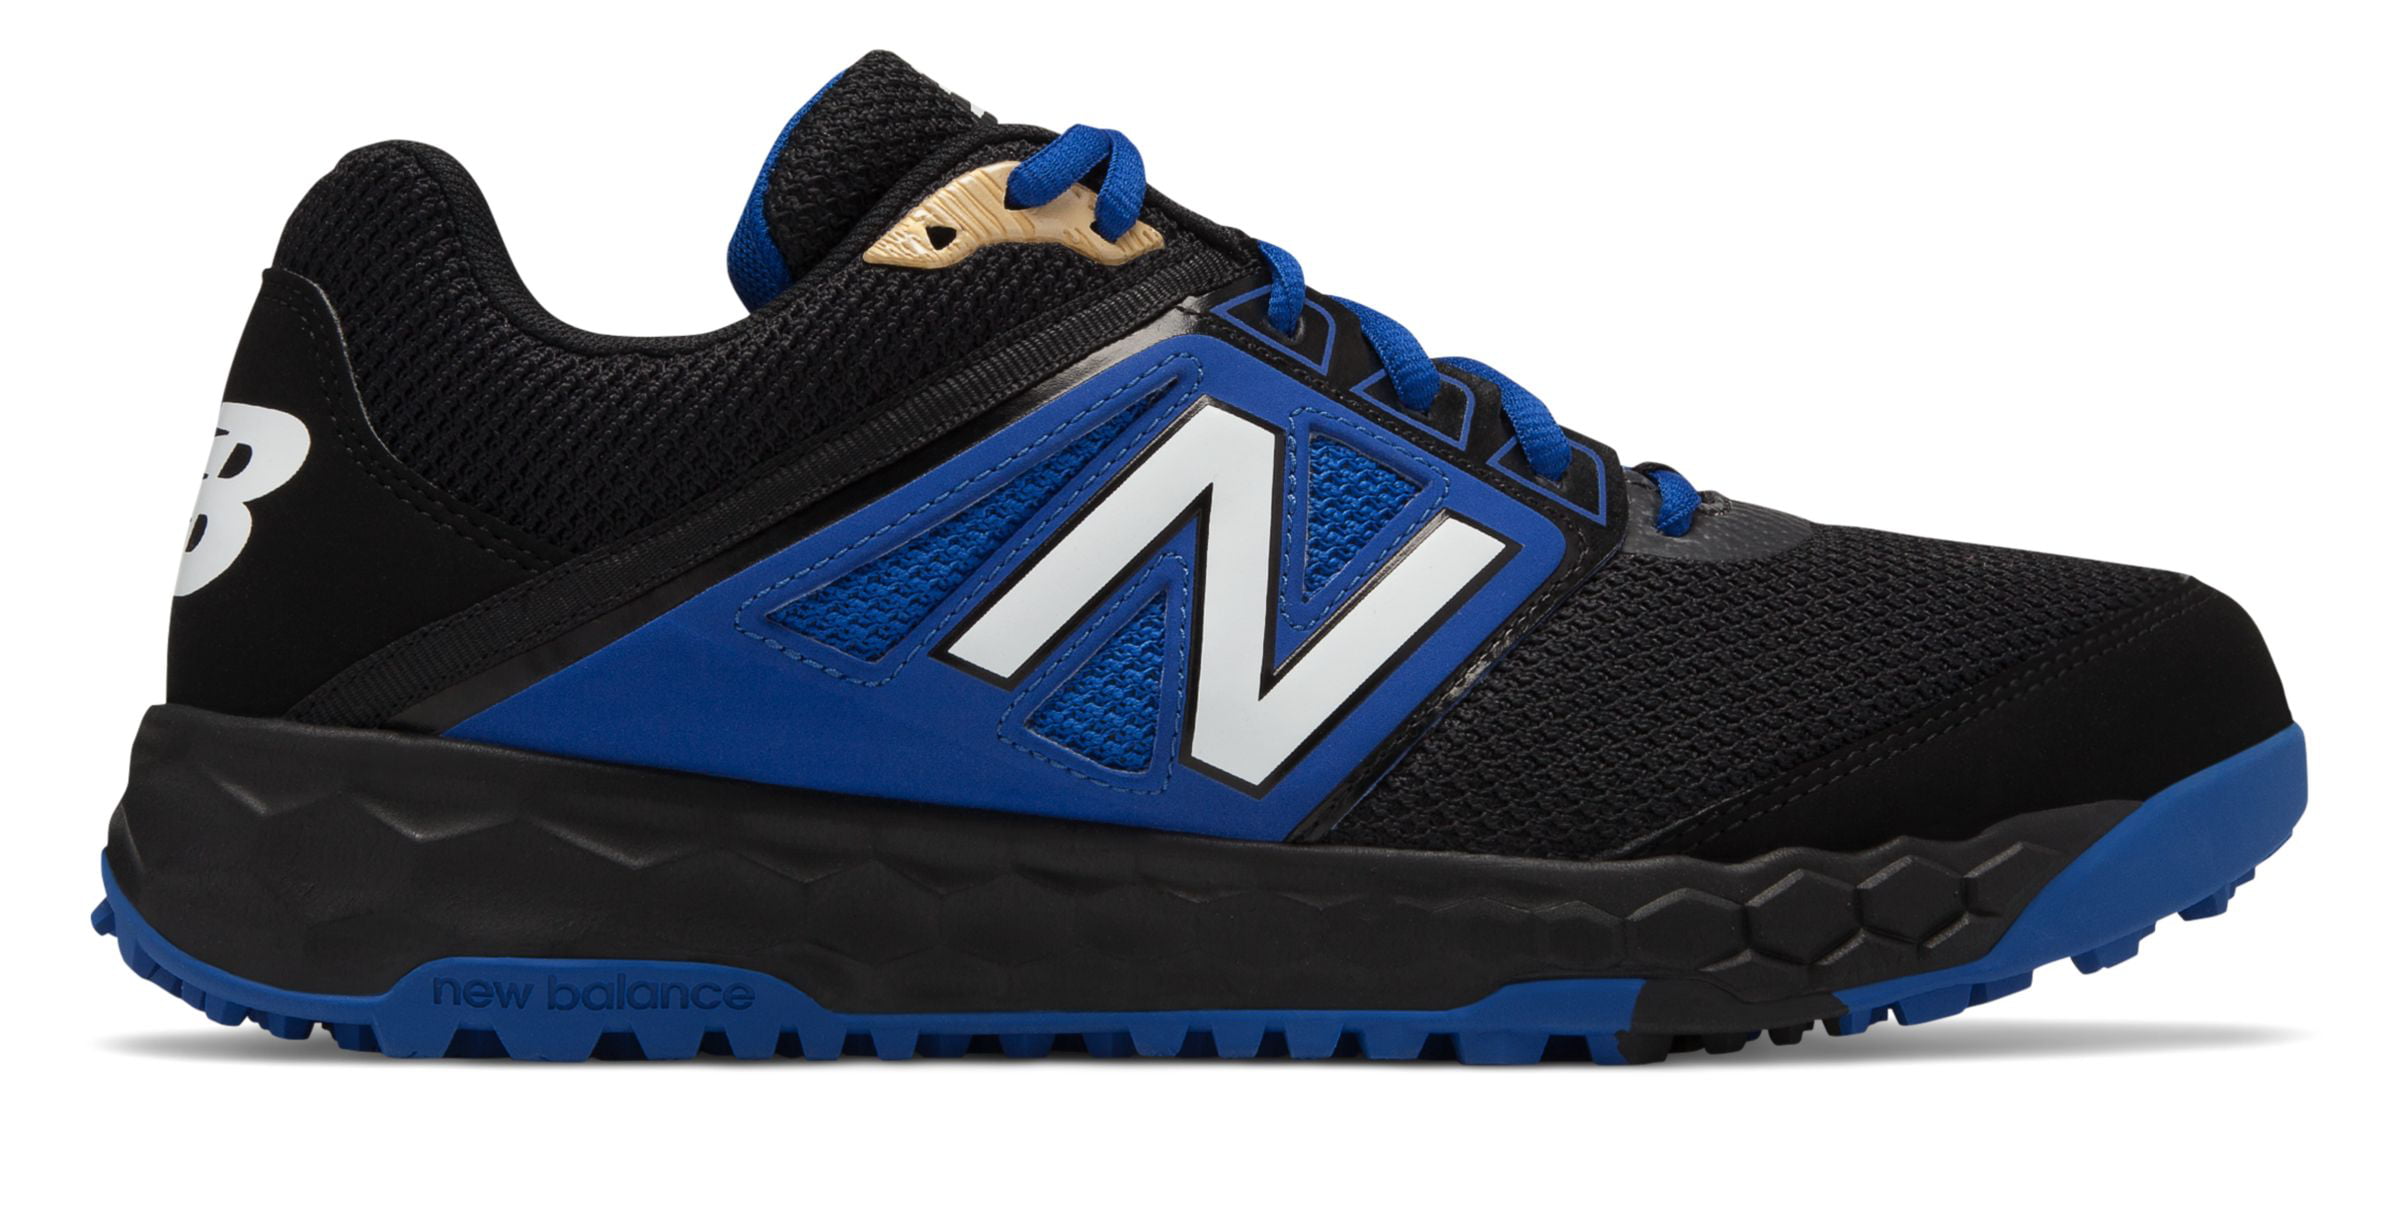 new balance shoes blue and black